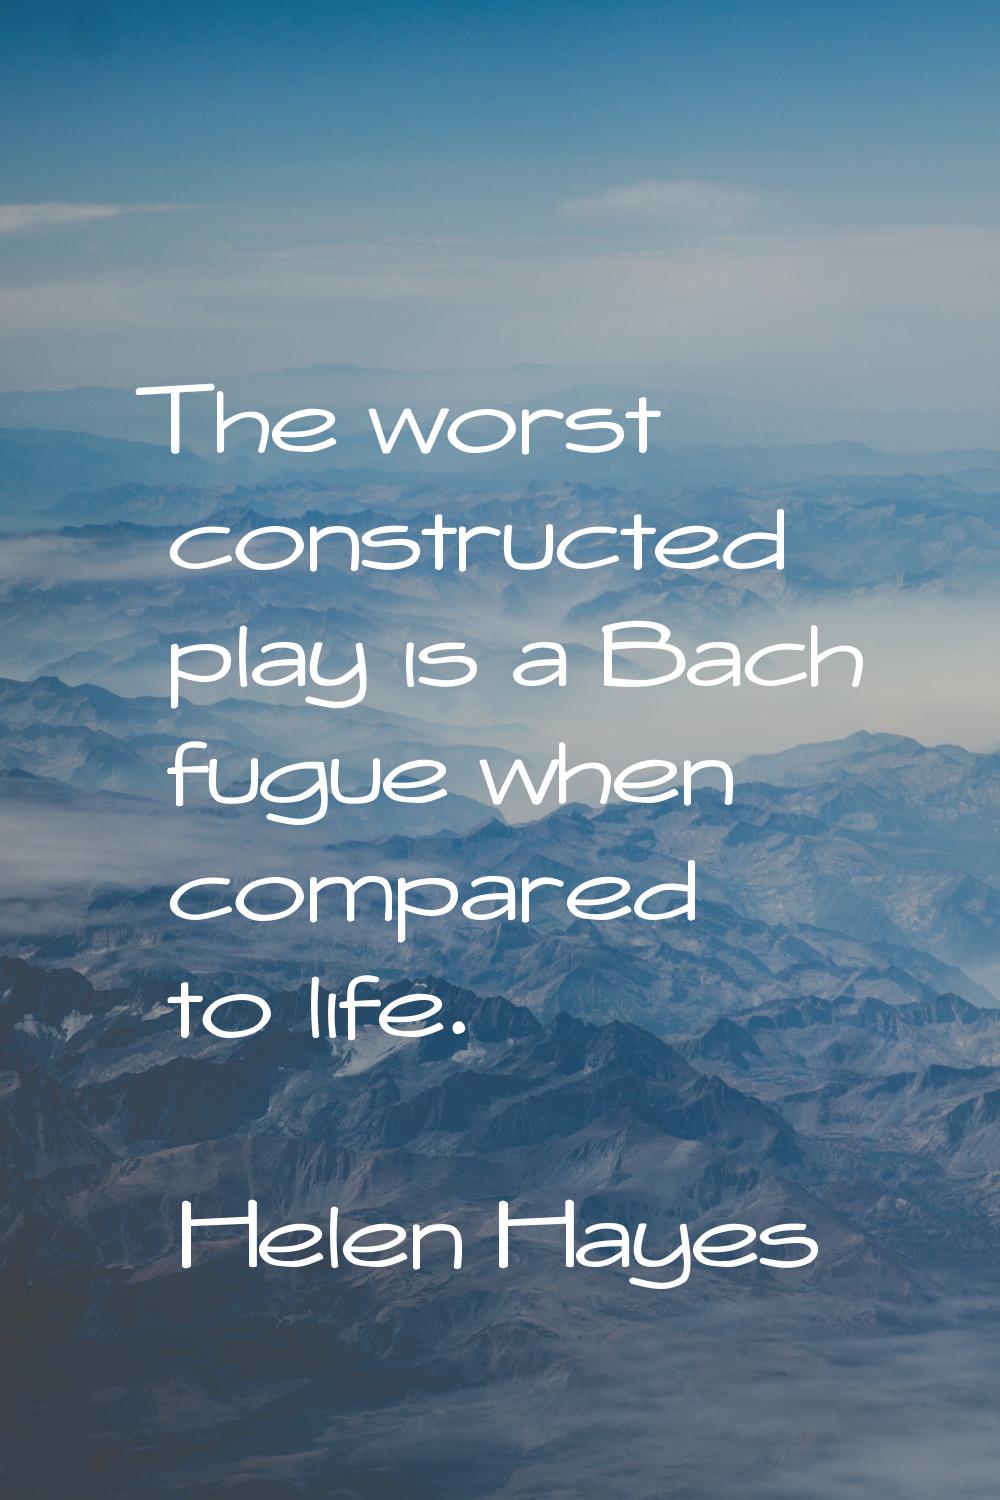 The worst constructed play is a Bach fugue when compared to life.